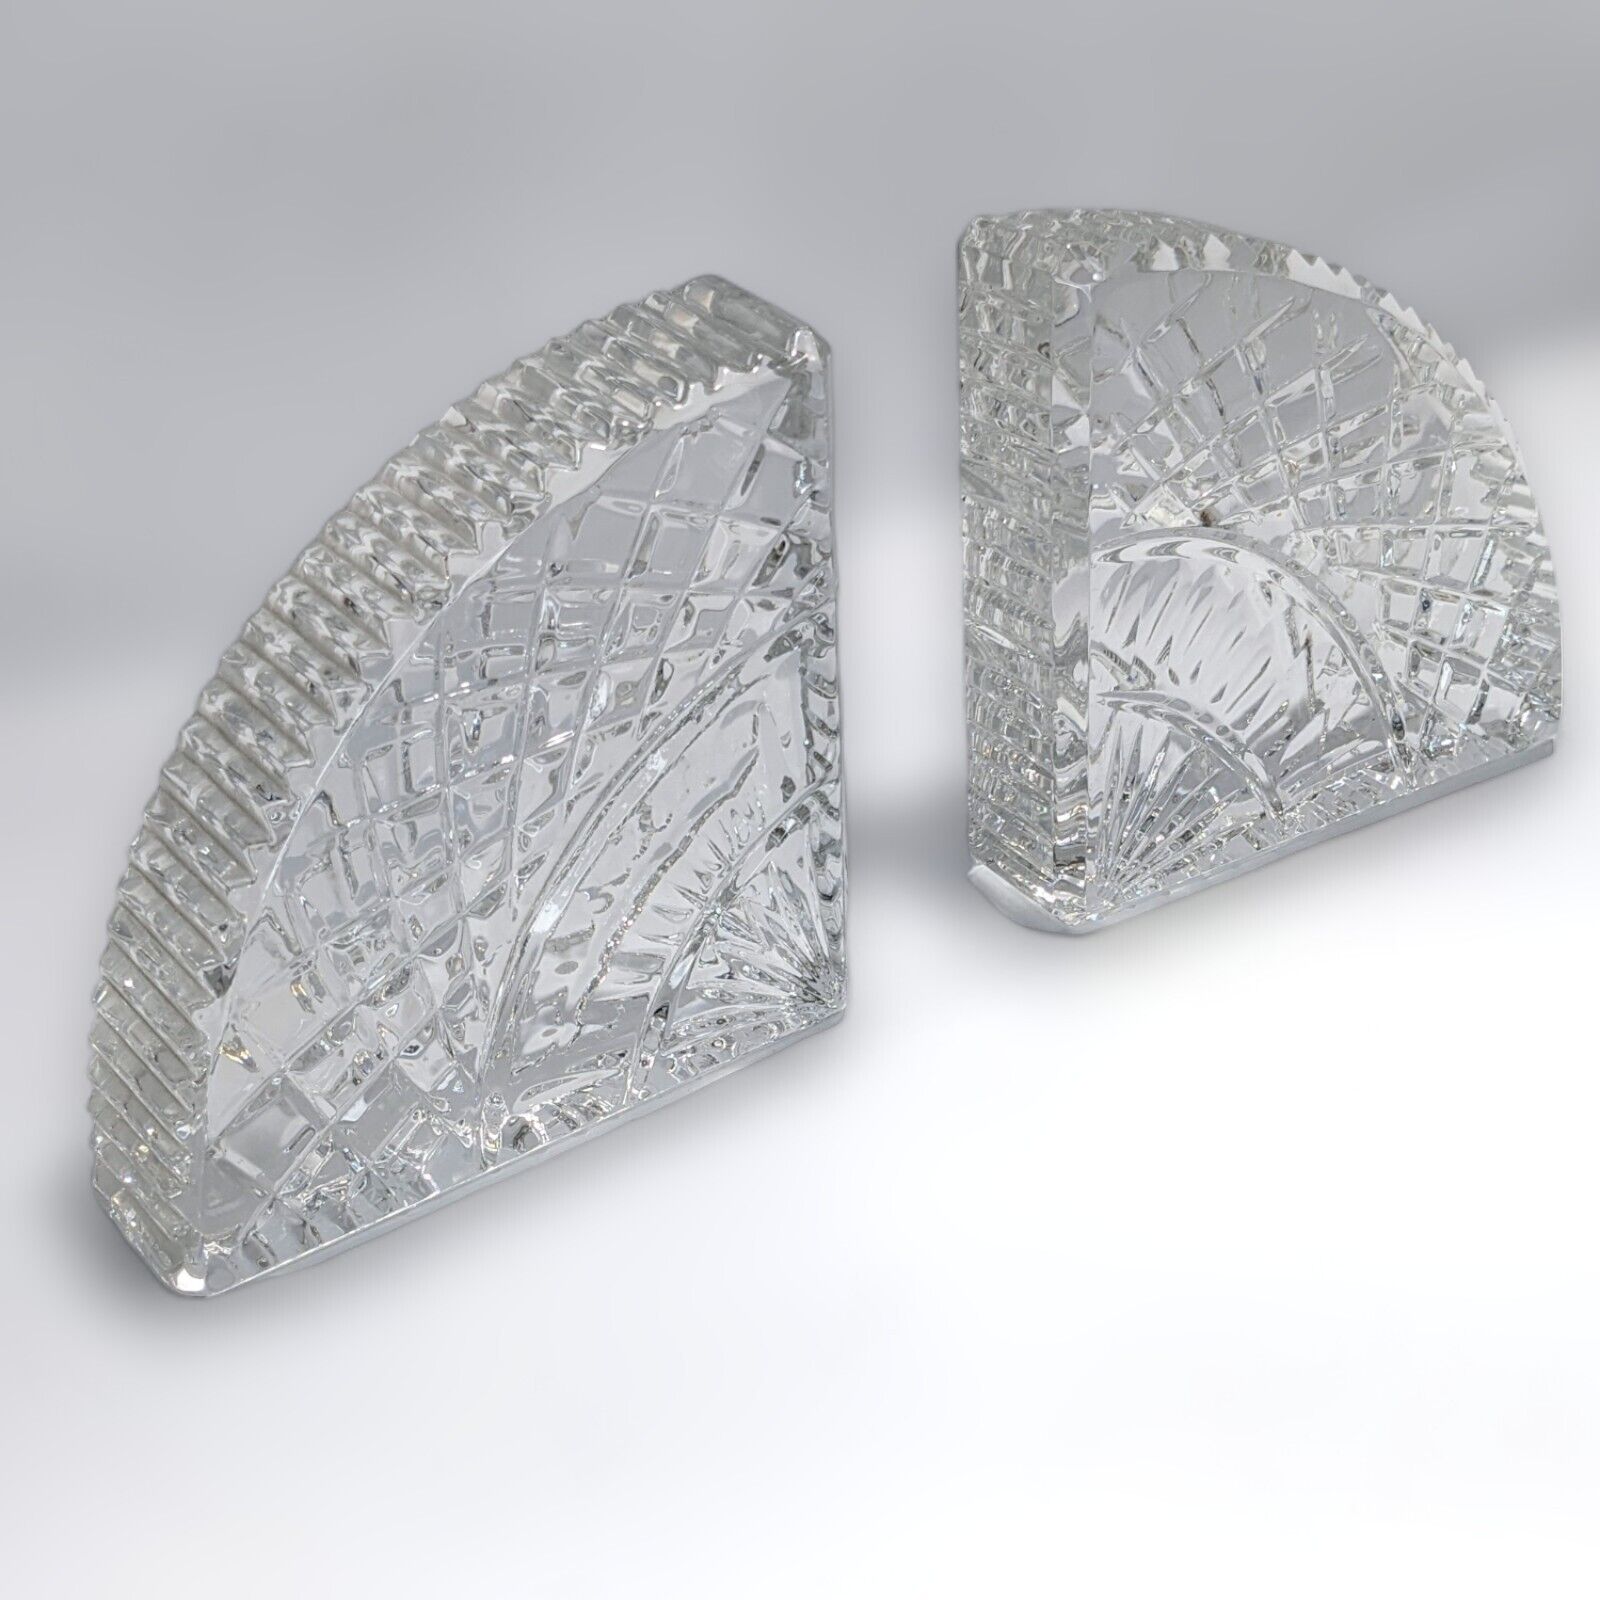 Authentic Waterford Cut Crystal Quadrant Pair Bookends Fan Style Made in Ireland